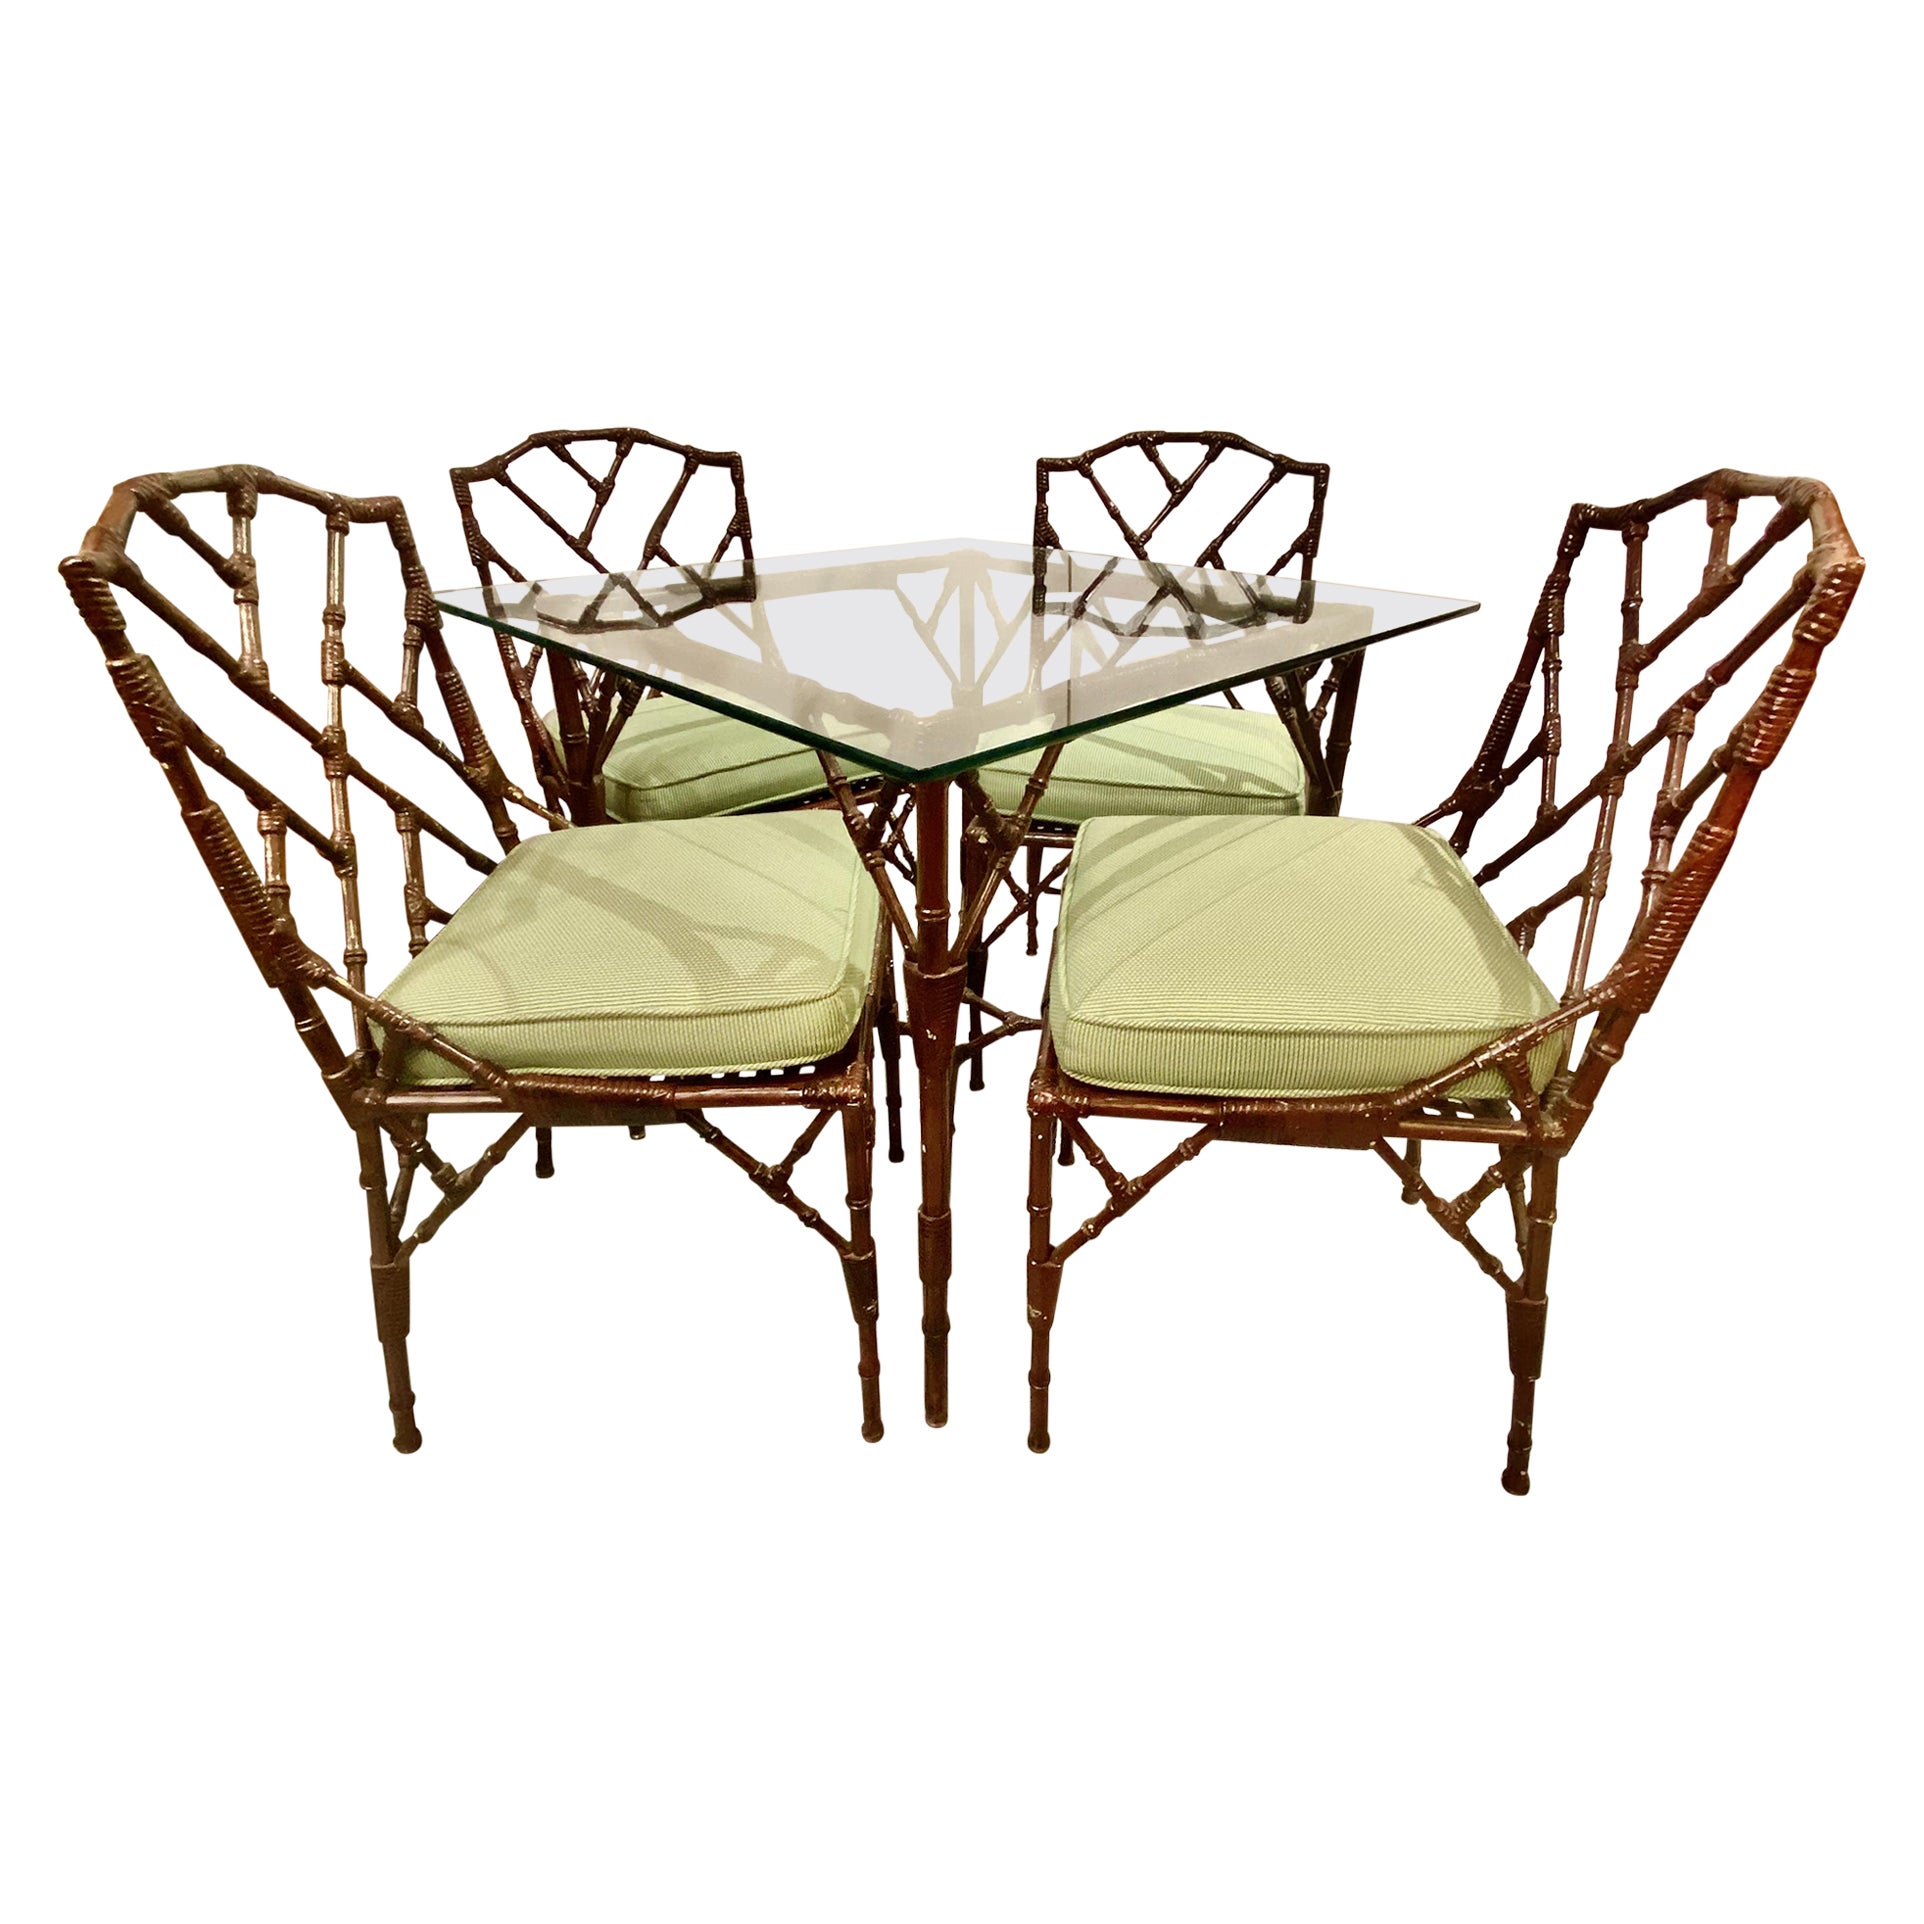 Set of Four Faux Bamboo Chairs and Table, c. 1970-1980